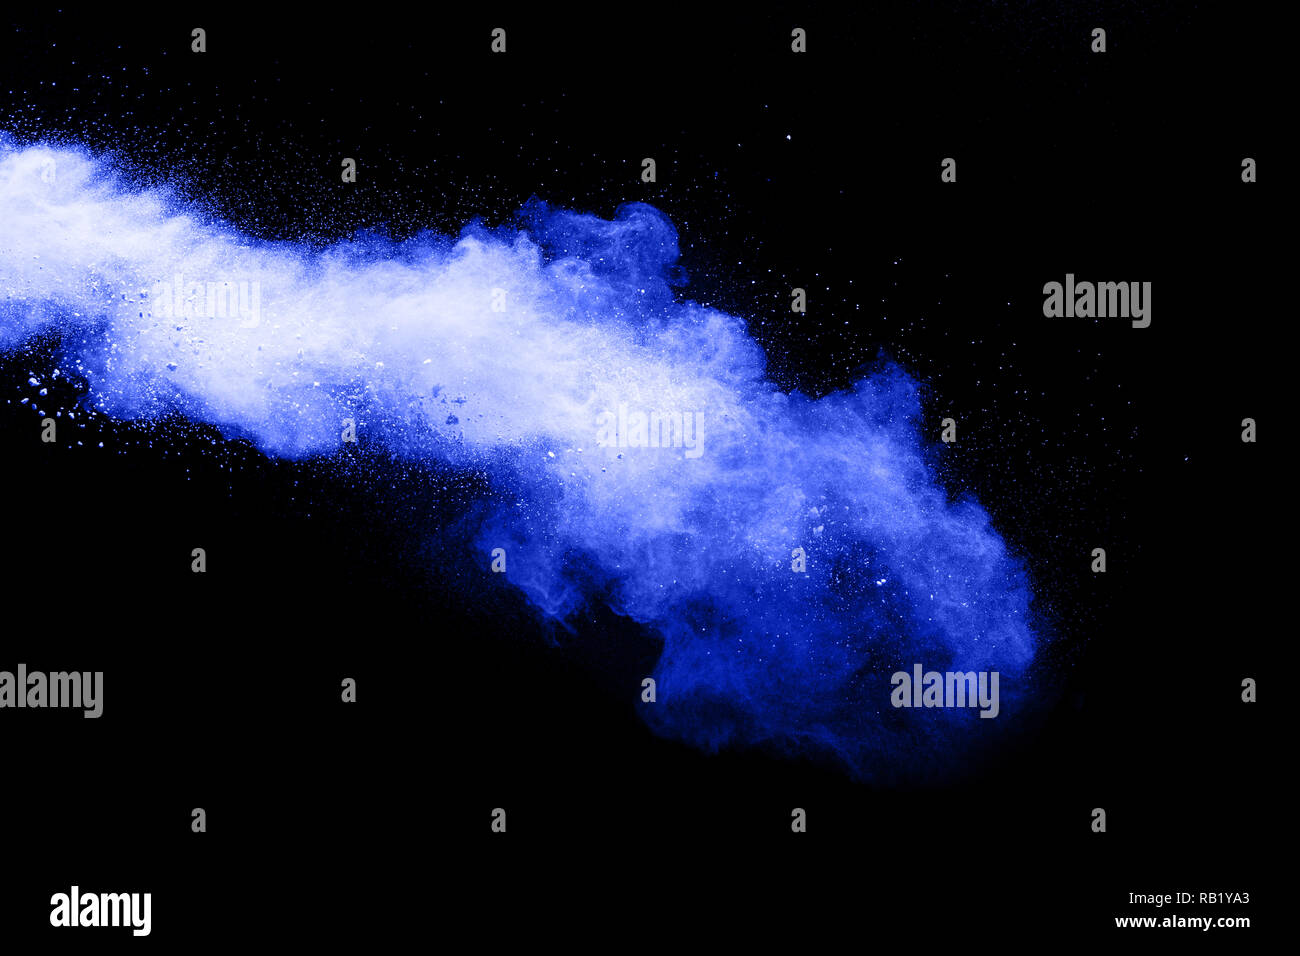 Blue powder explode cloud on black background. Launched blue dust particles splash on  background. Stock Photo